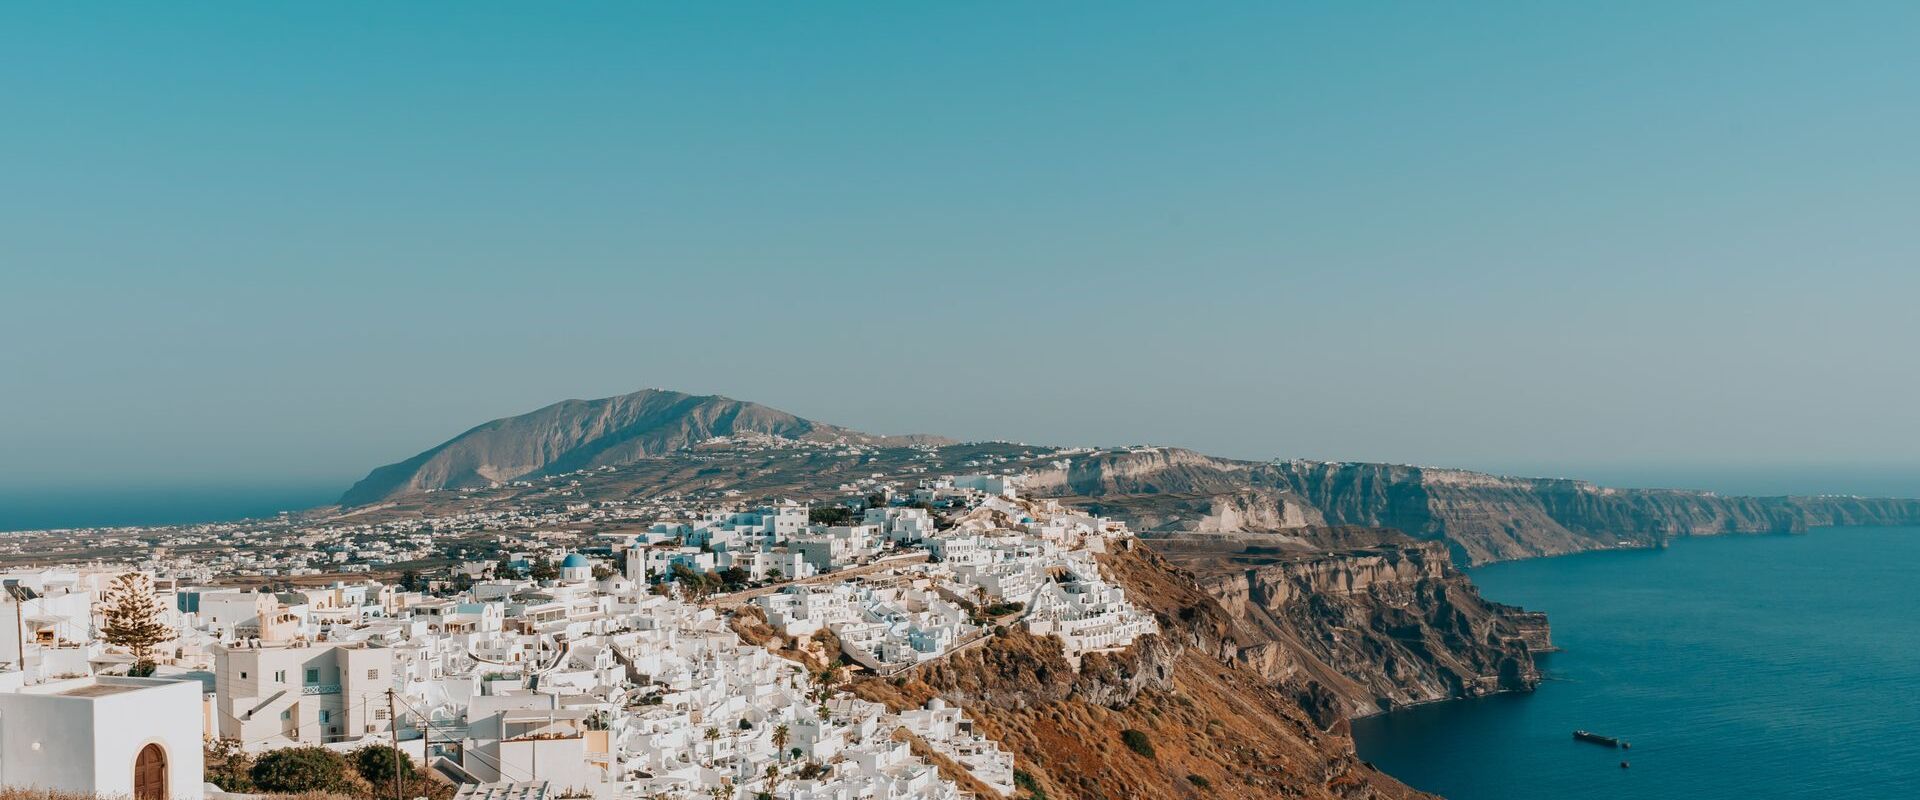 Who hasn’t dreamed of visiting Santorini The iconic caldera and chic Cycladic aura are part of you even before you’ve arrived.